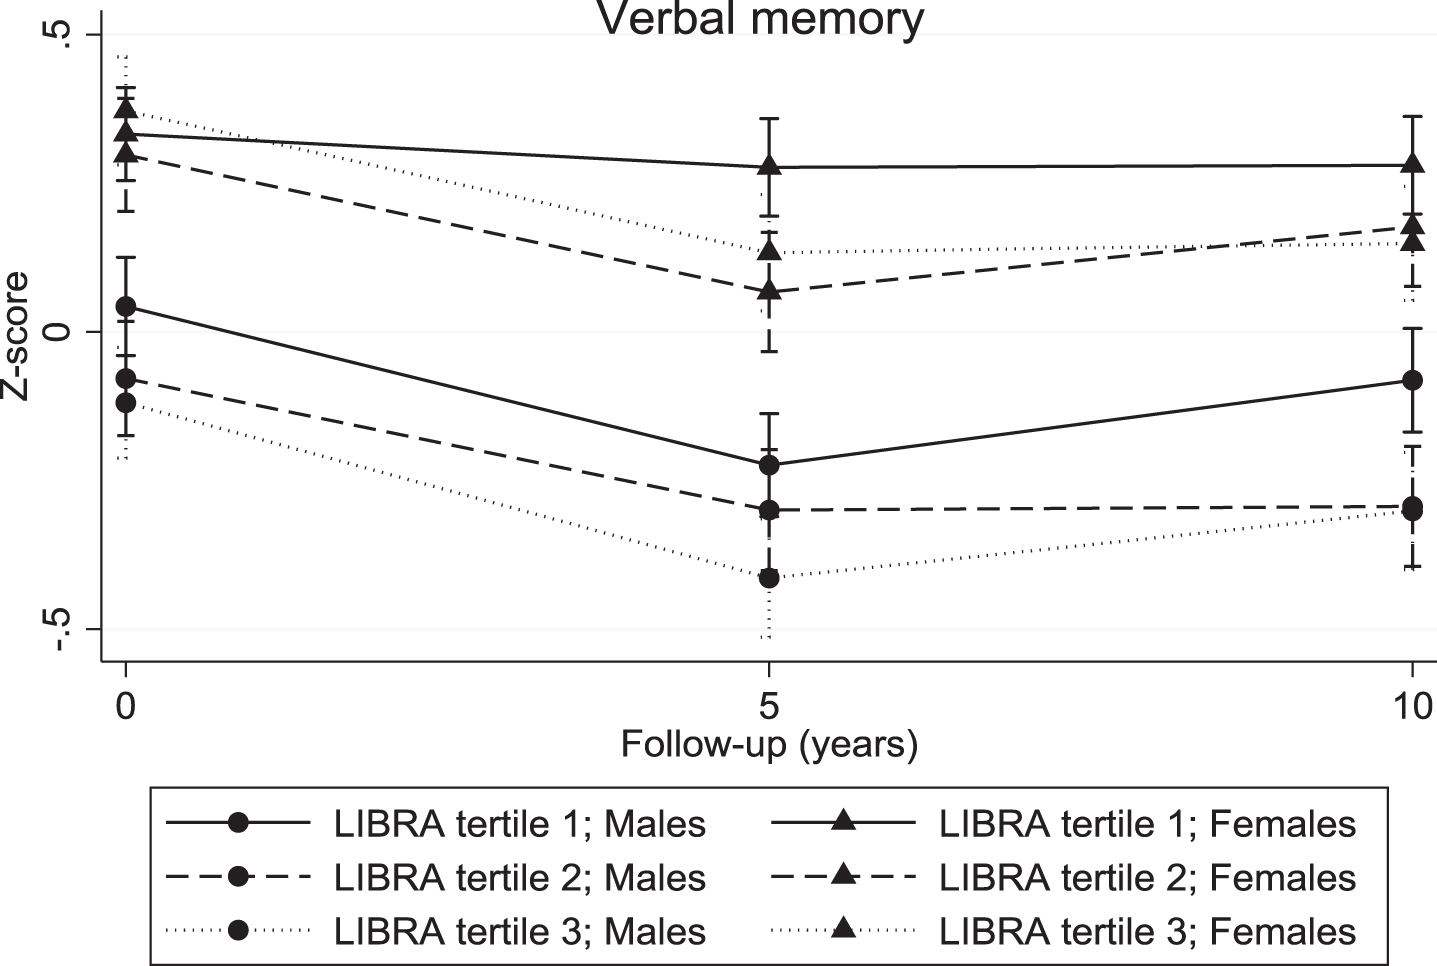 Verbal memory trajectories for individuals in the three LIBRA risk groups, by gender.